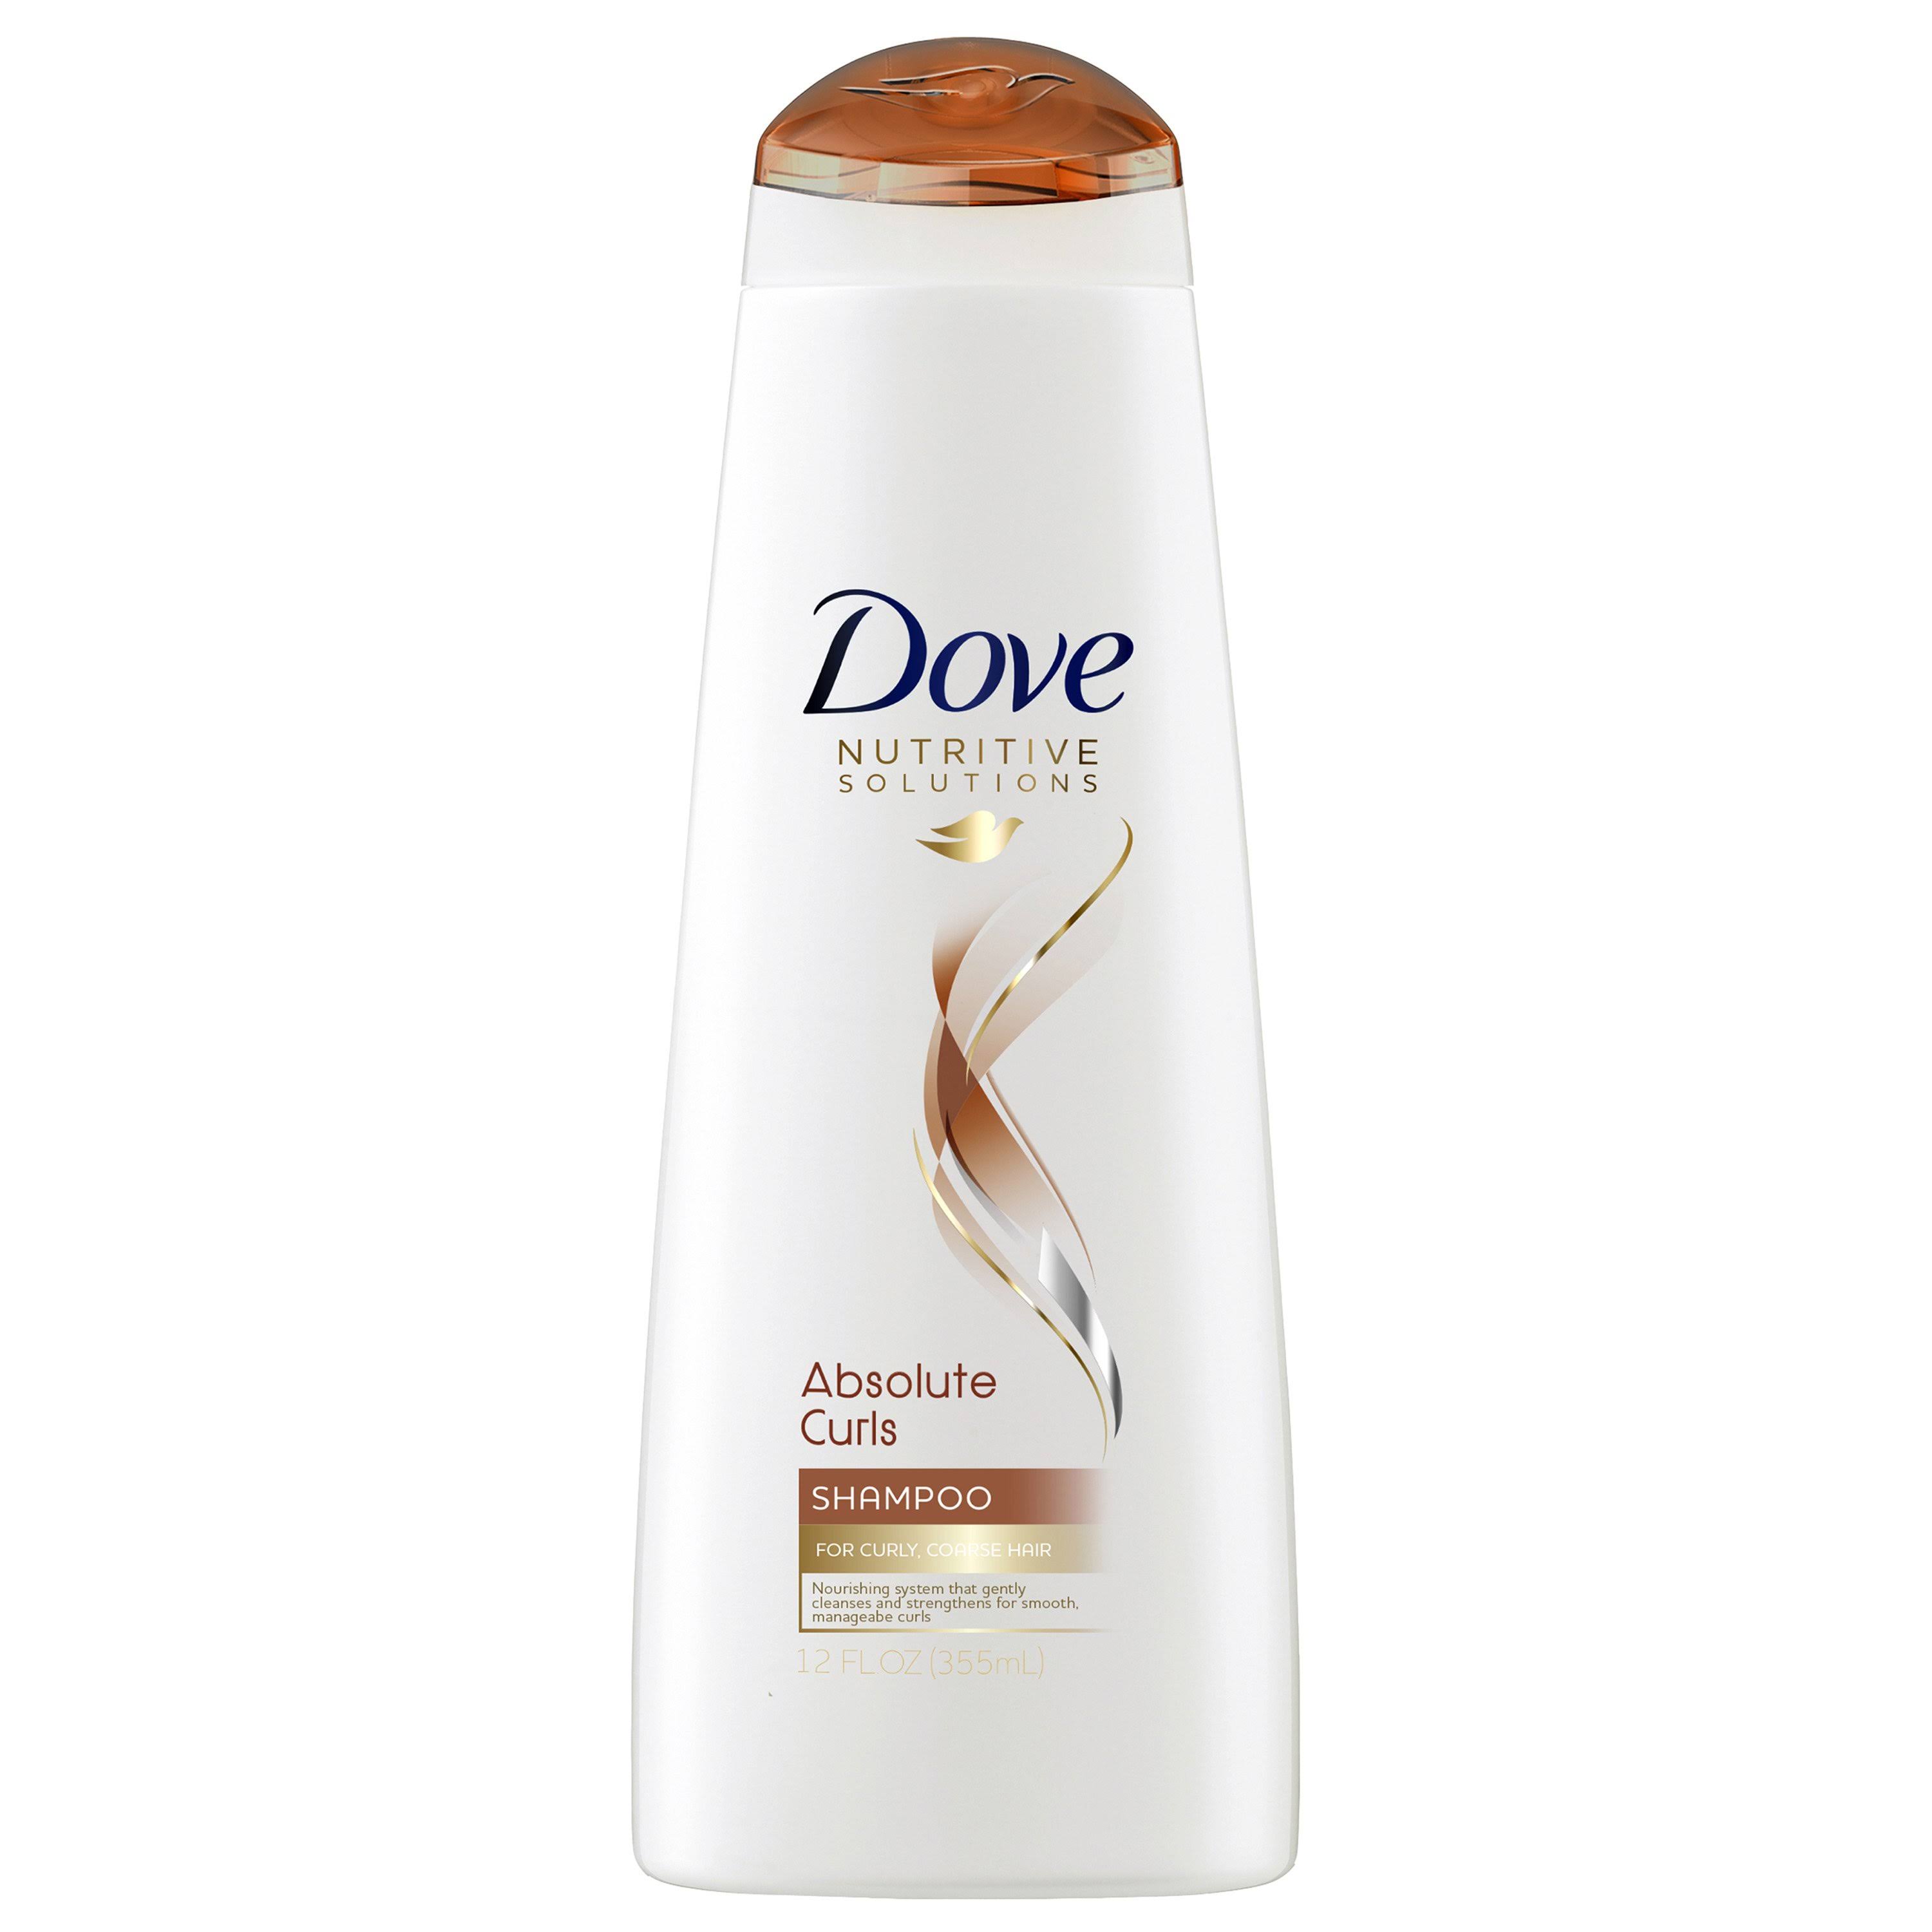 Dove Nutritive Solutions Absolute Curls Shampoo - 12oz